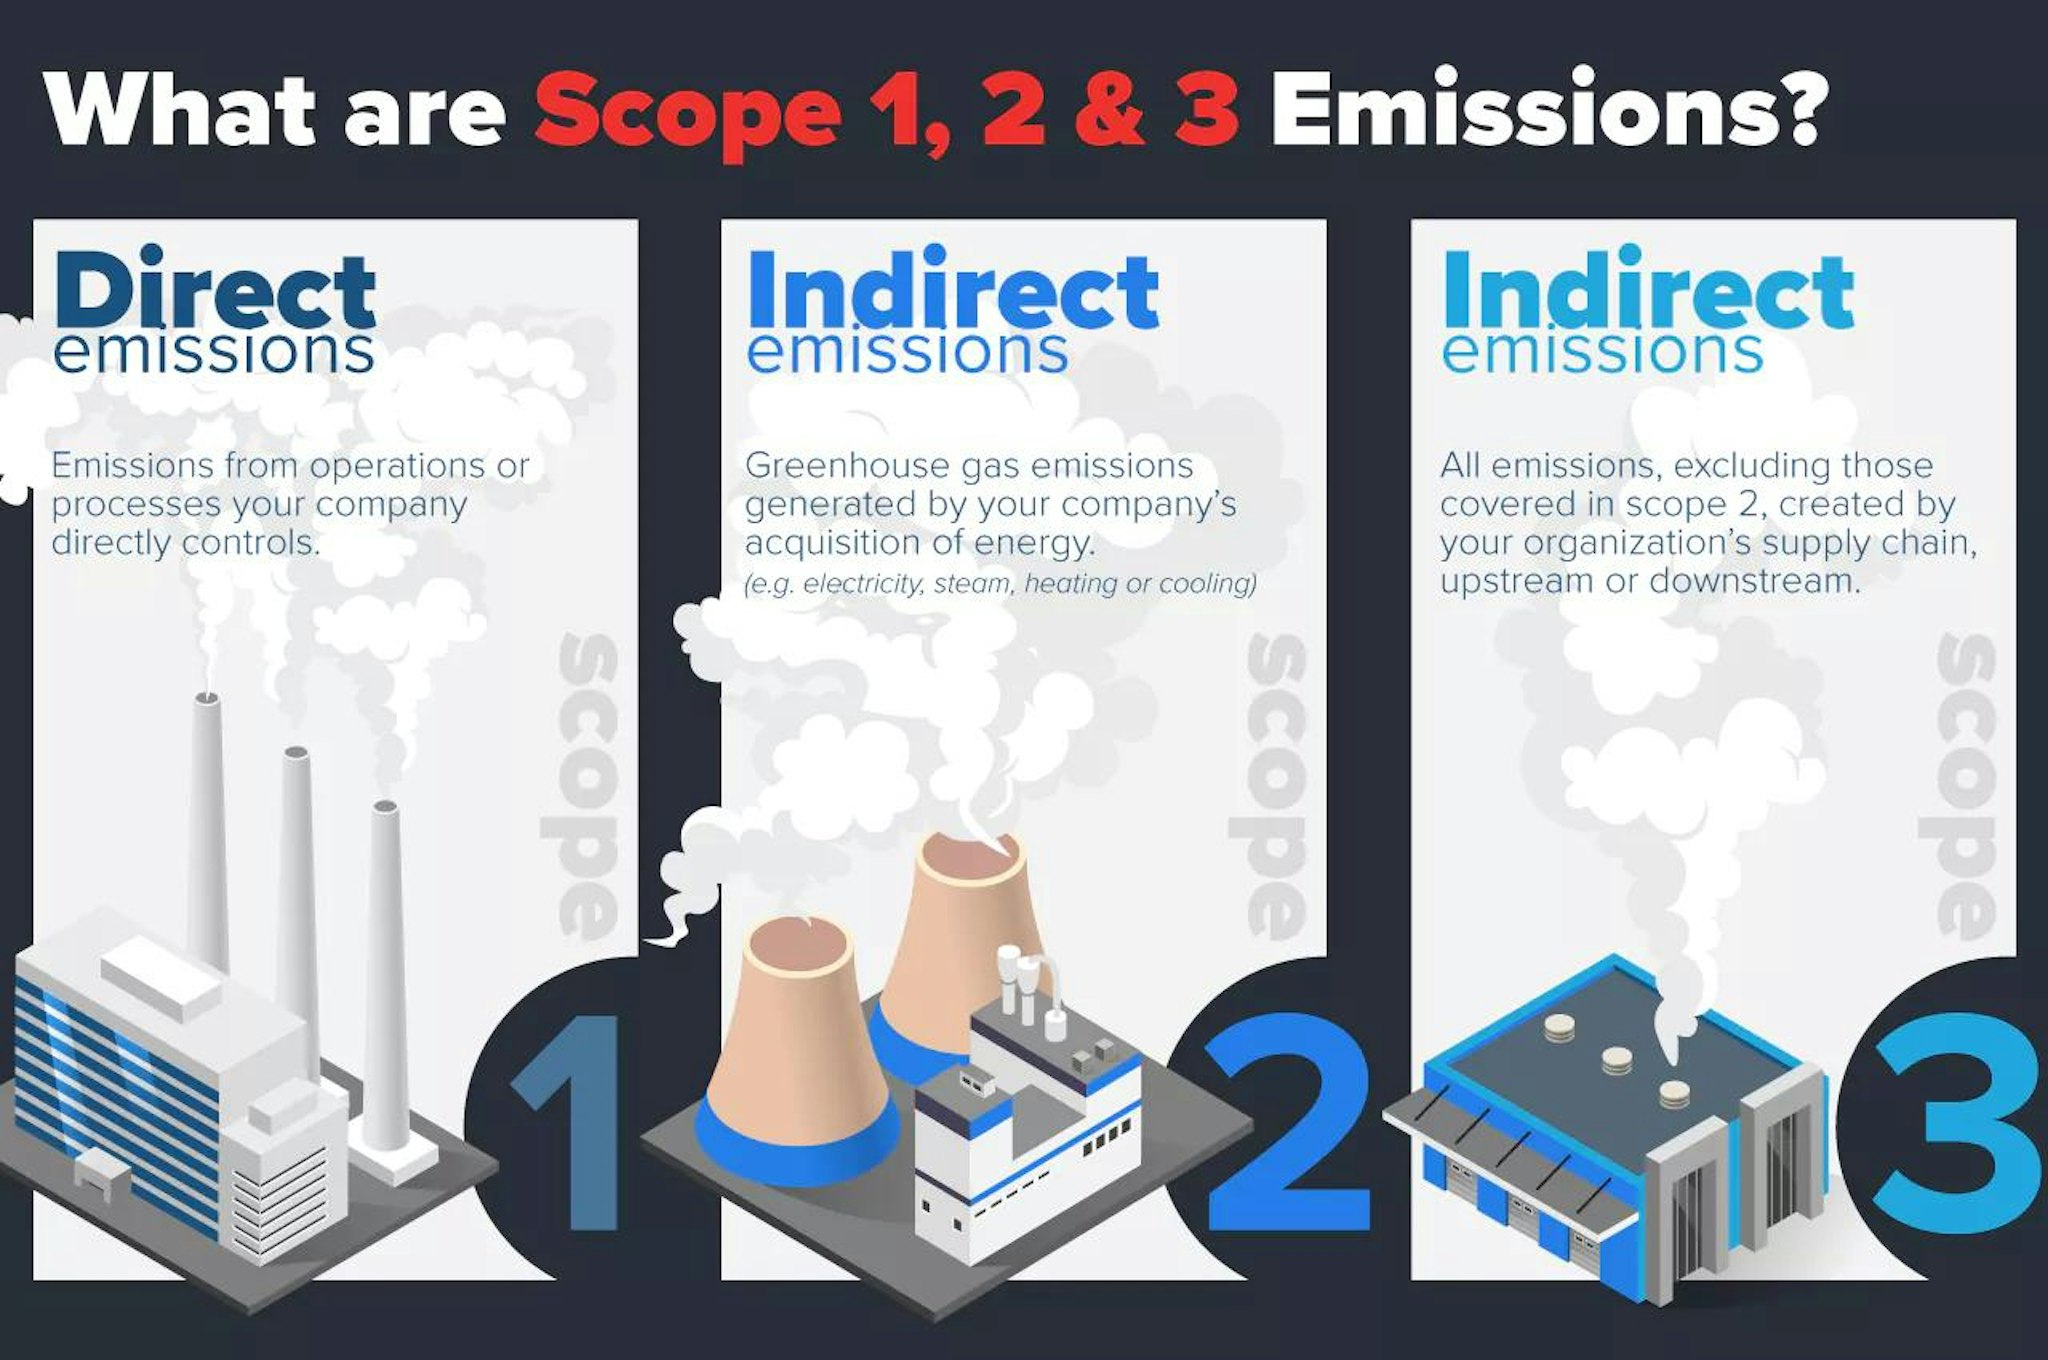 What are carbon emissions scopes? - ClimateTrade